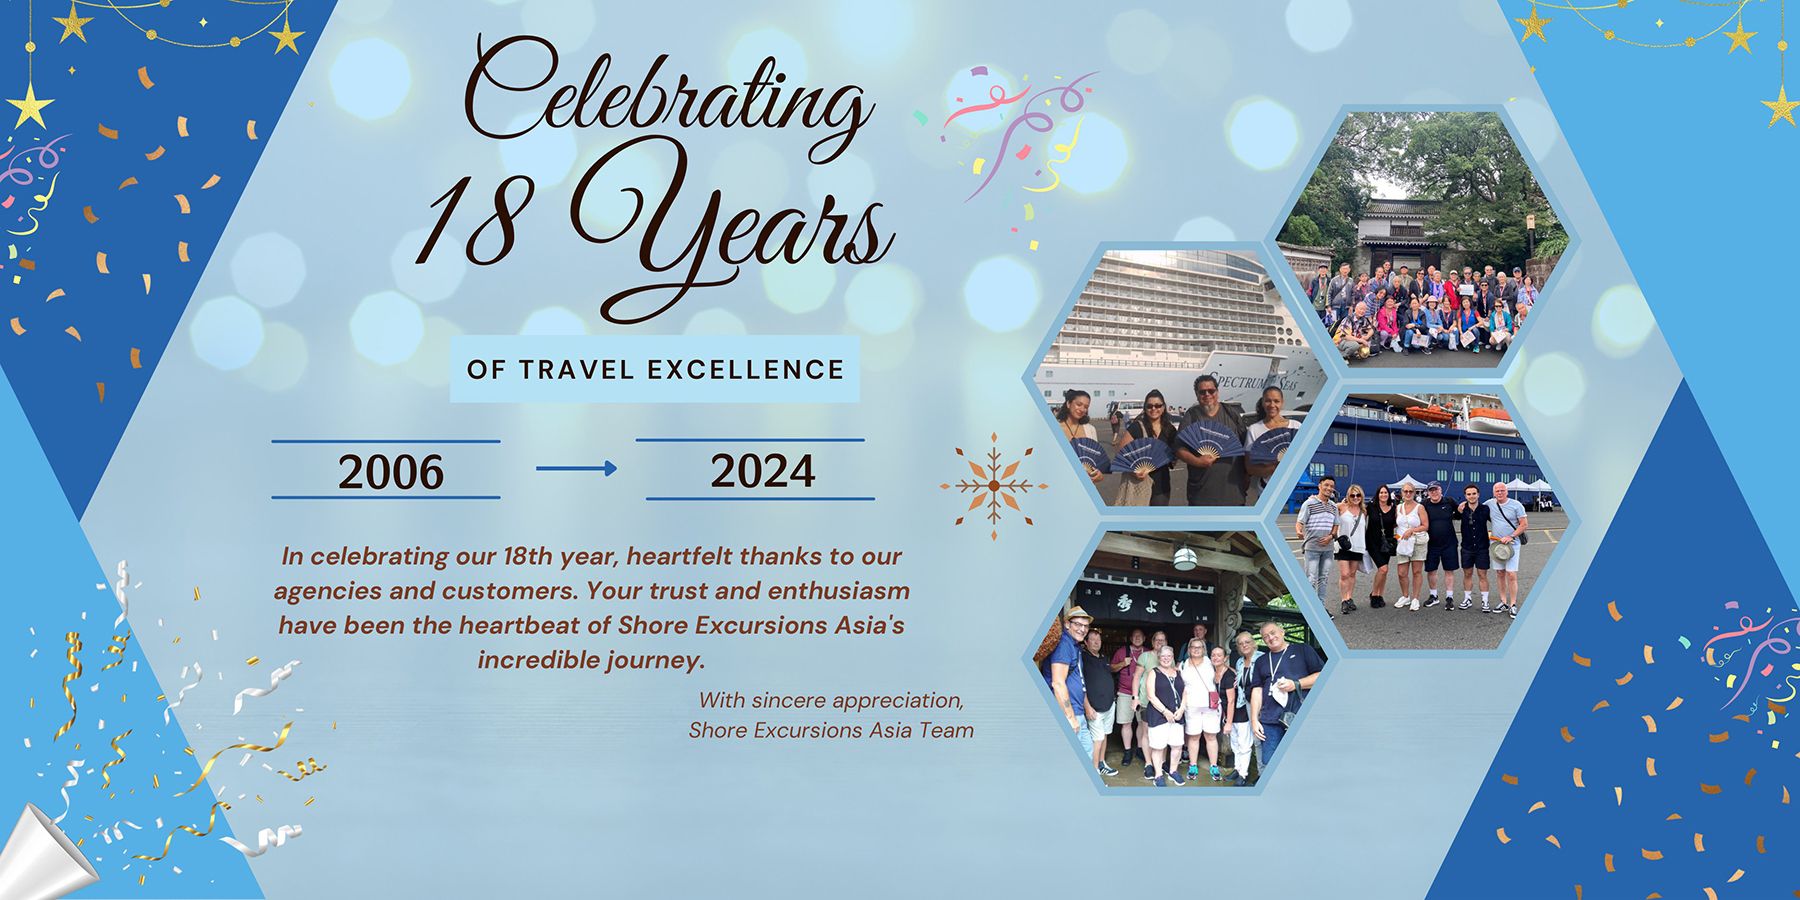 Celebrating 18 years of Shore Excursions Asia